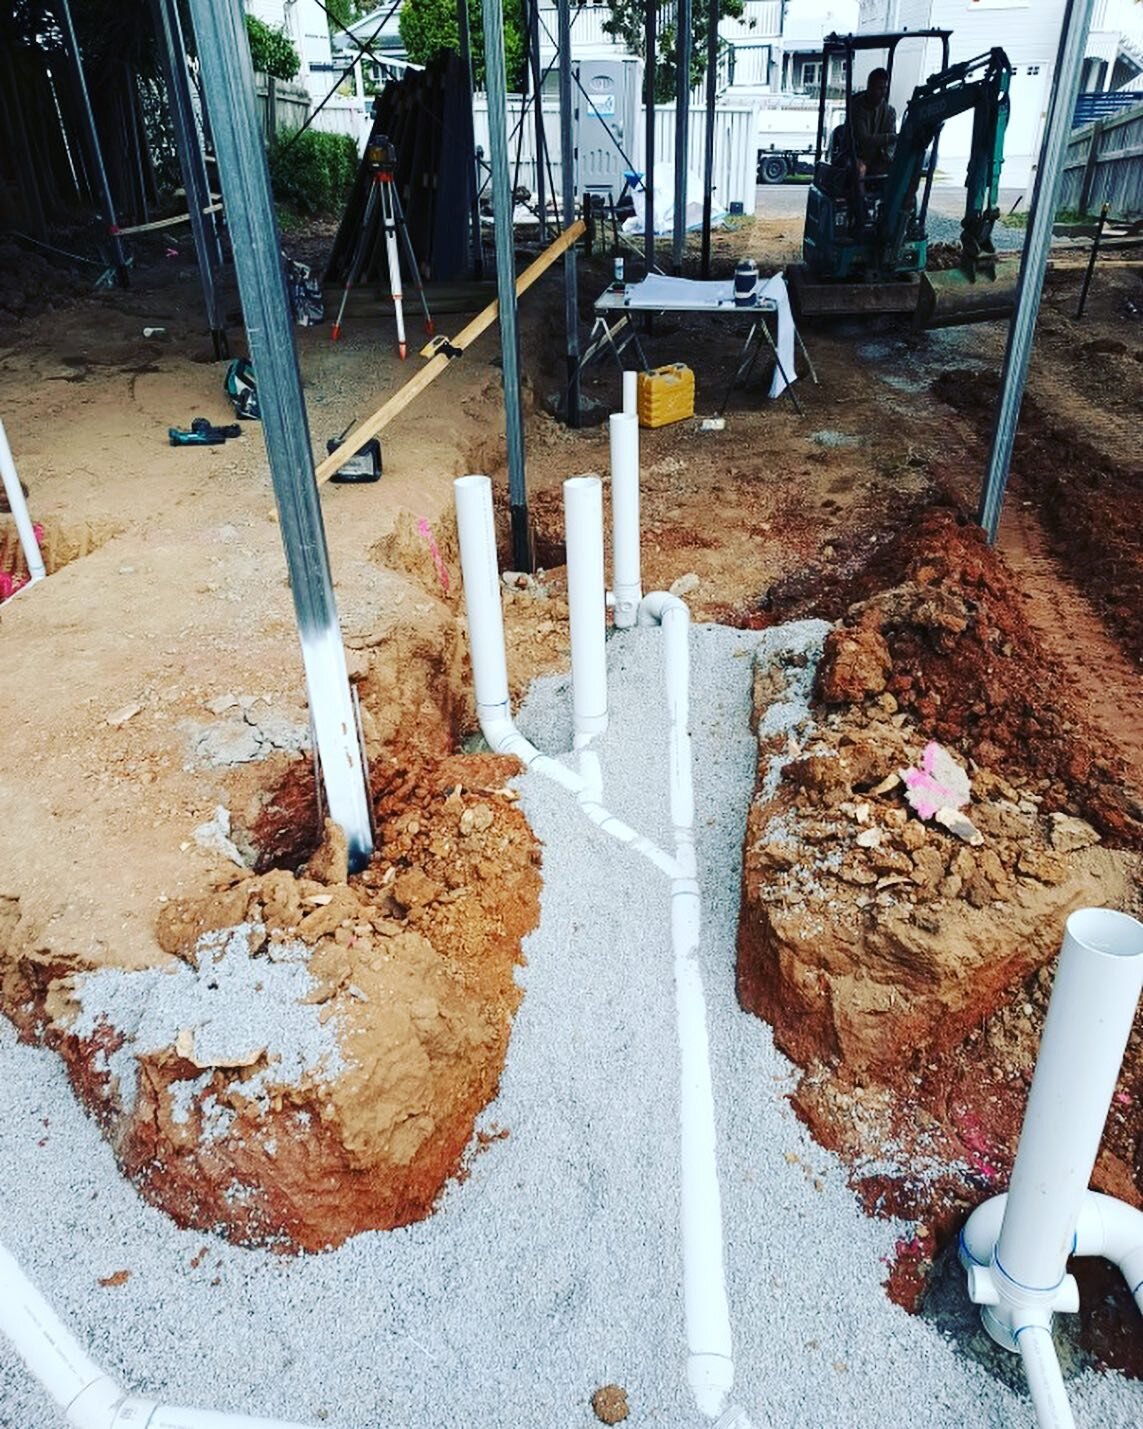 A house drain done for one of our builders as they upgrade their own home.
We value the trust given to us by our builders to work on their own places and always maintain the quality and professionalism.